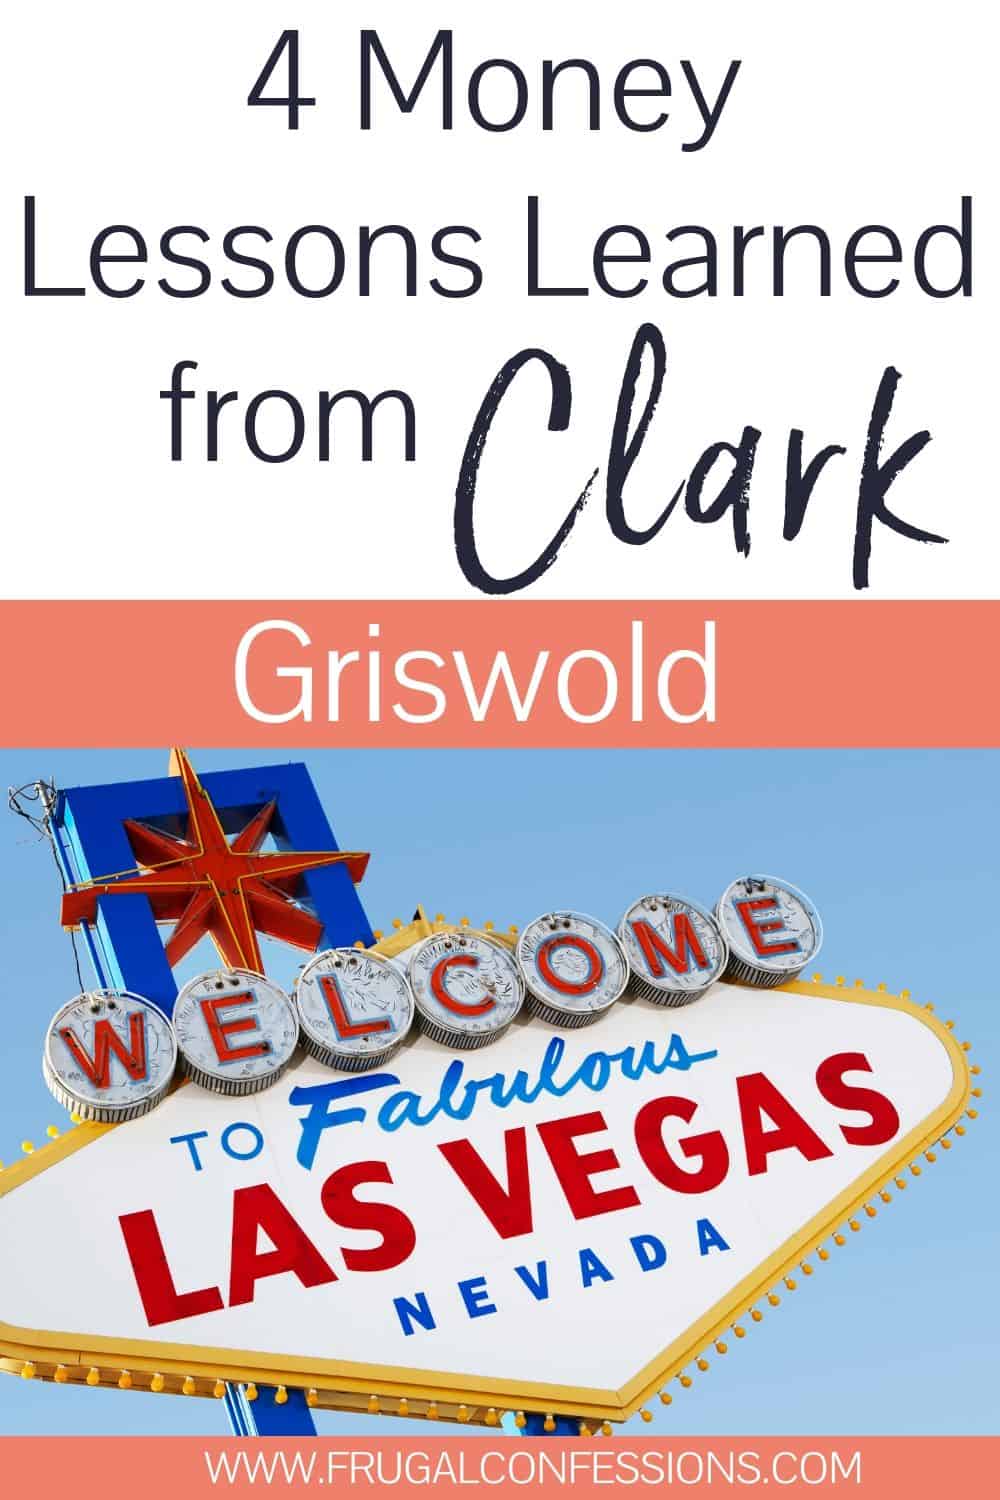 las vegas welcome sign, text overlay "4 money lessons learned from Clark Griswold"